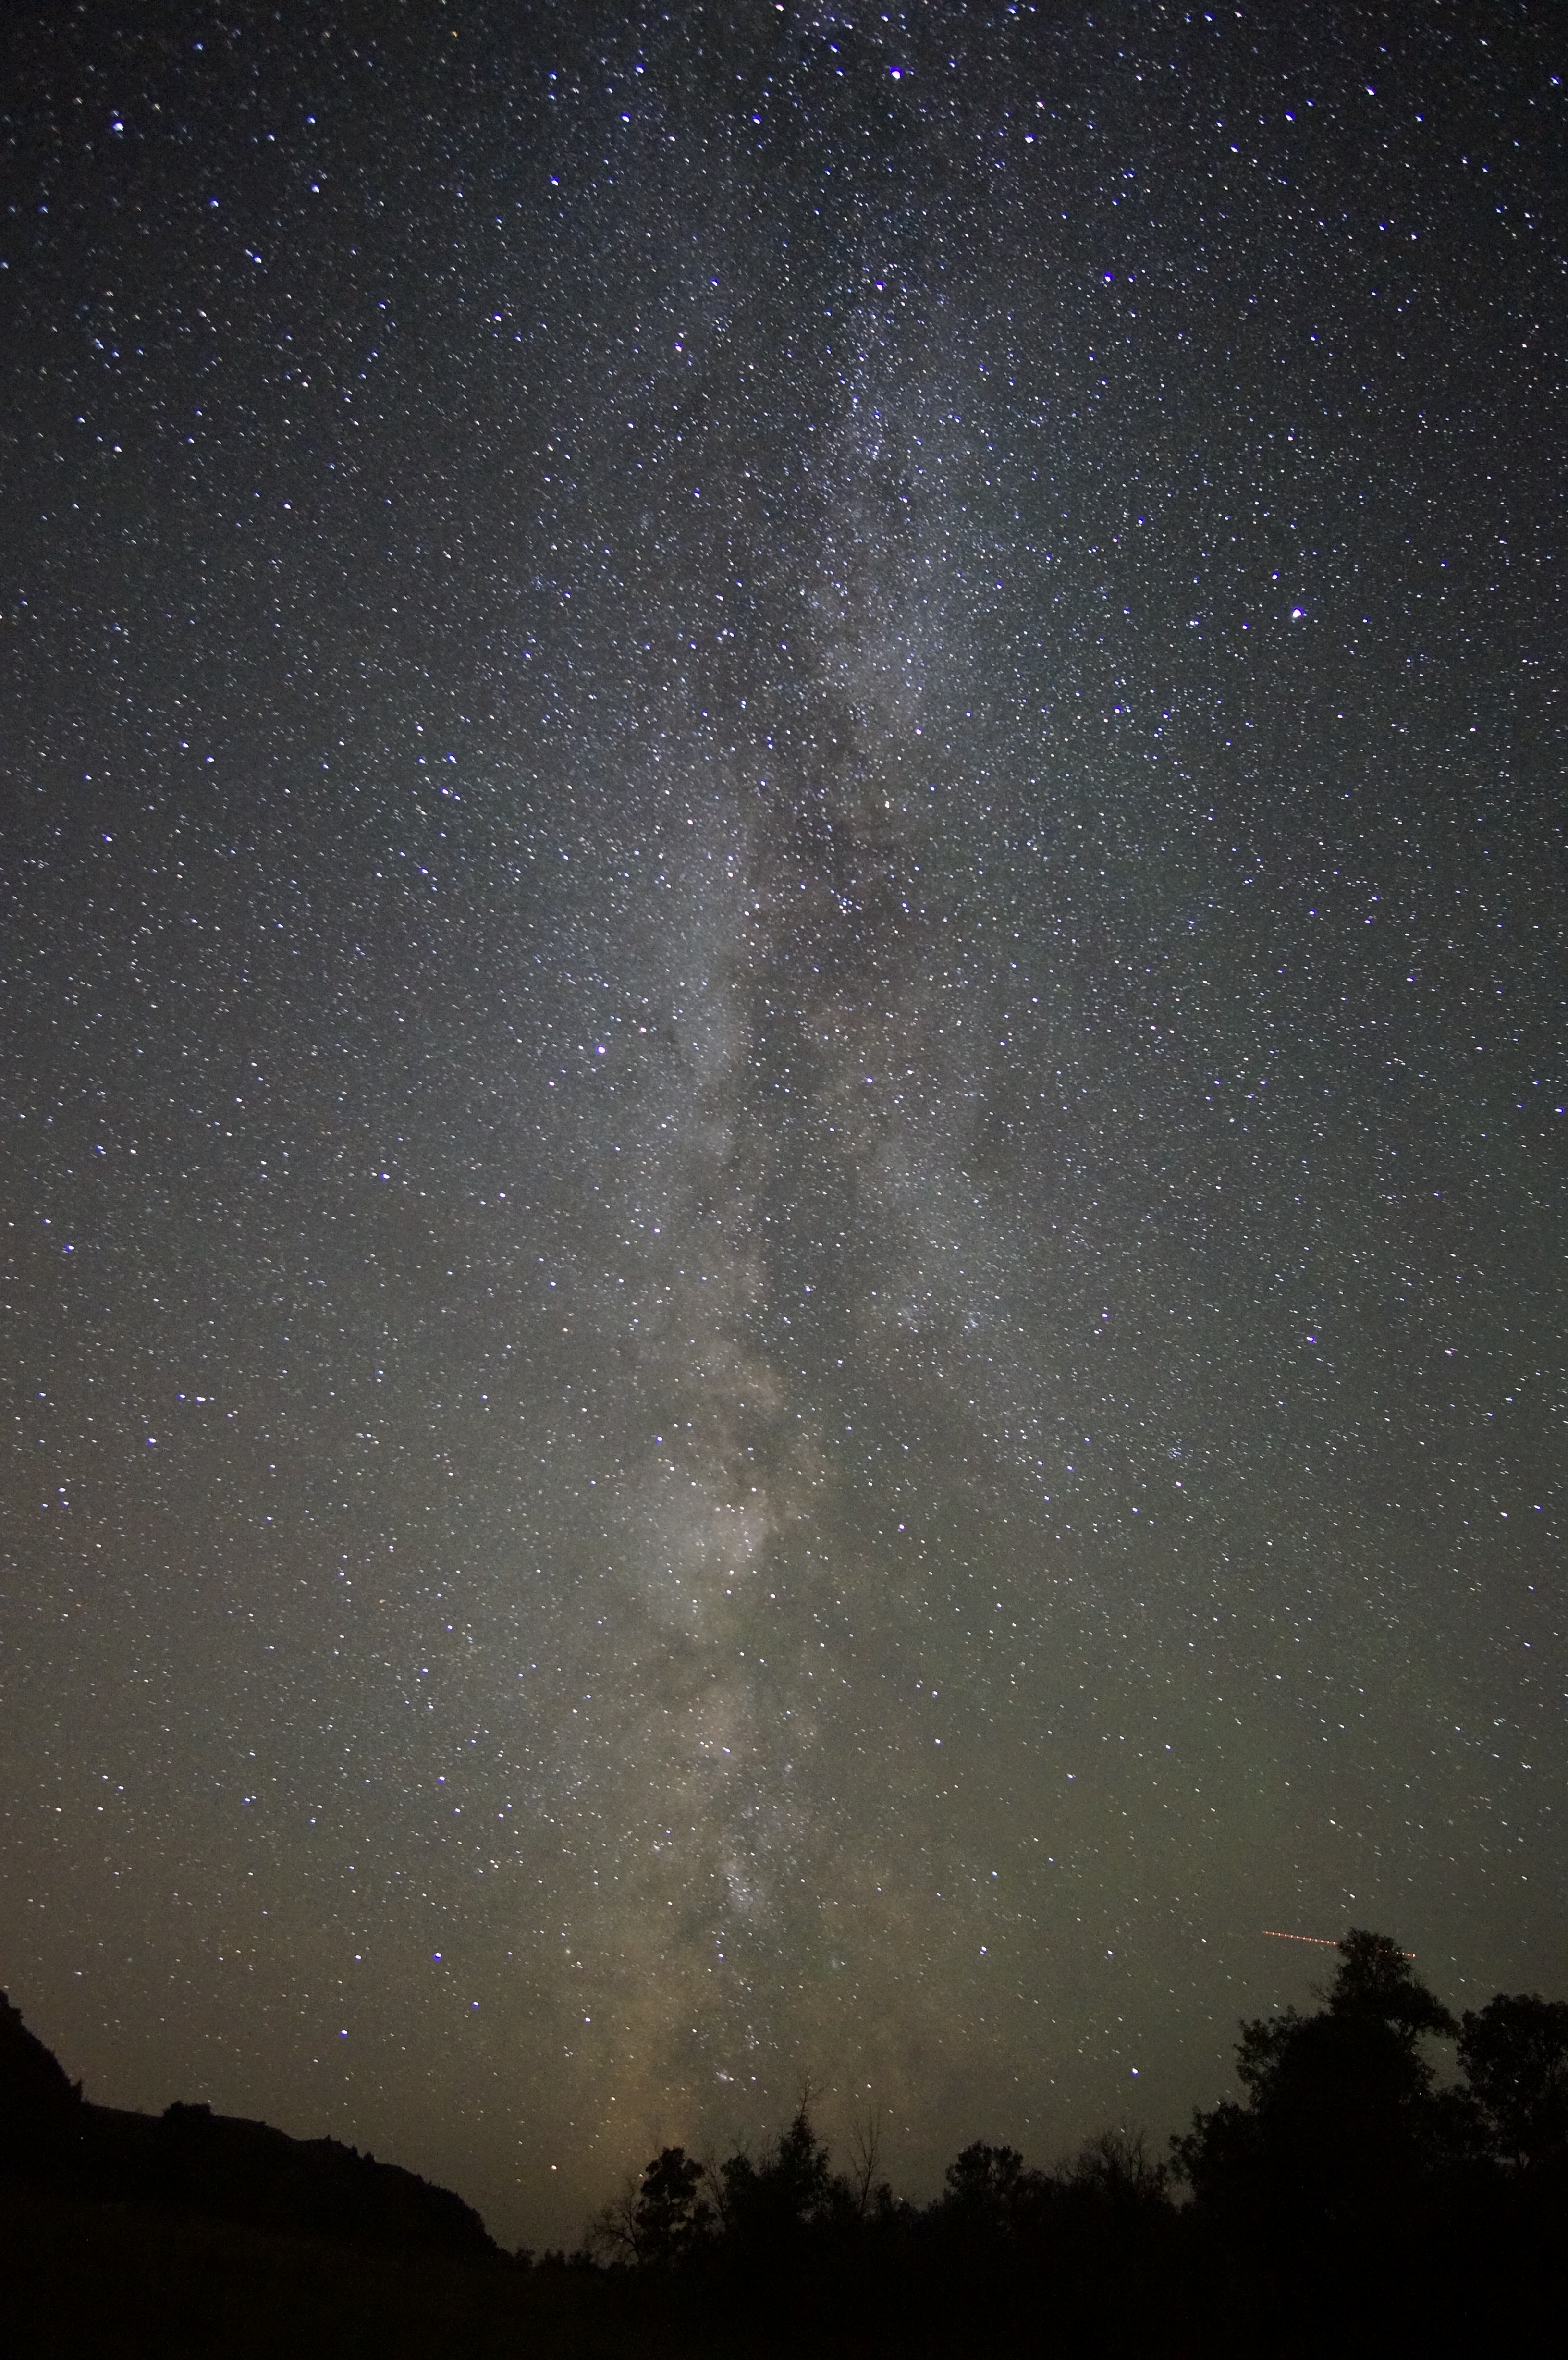 the swirling, dusty looking milky way runs vertically though a starry night sky